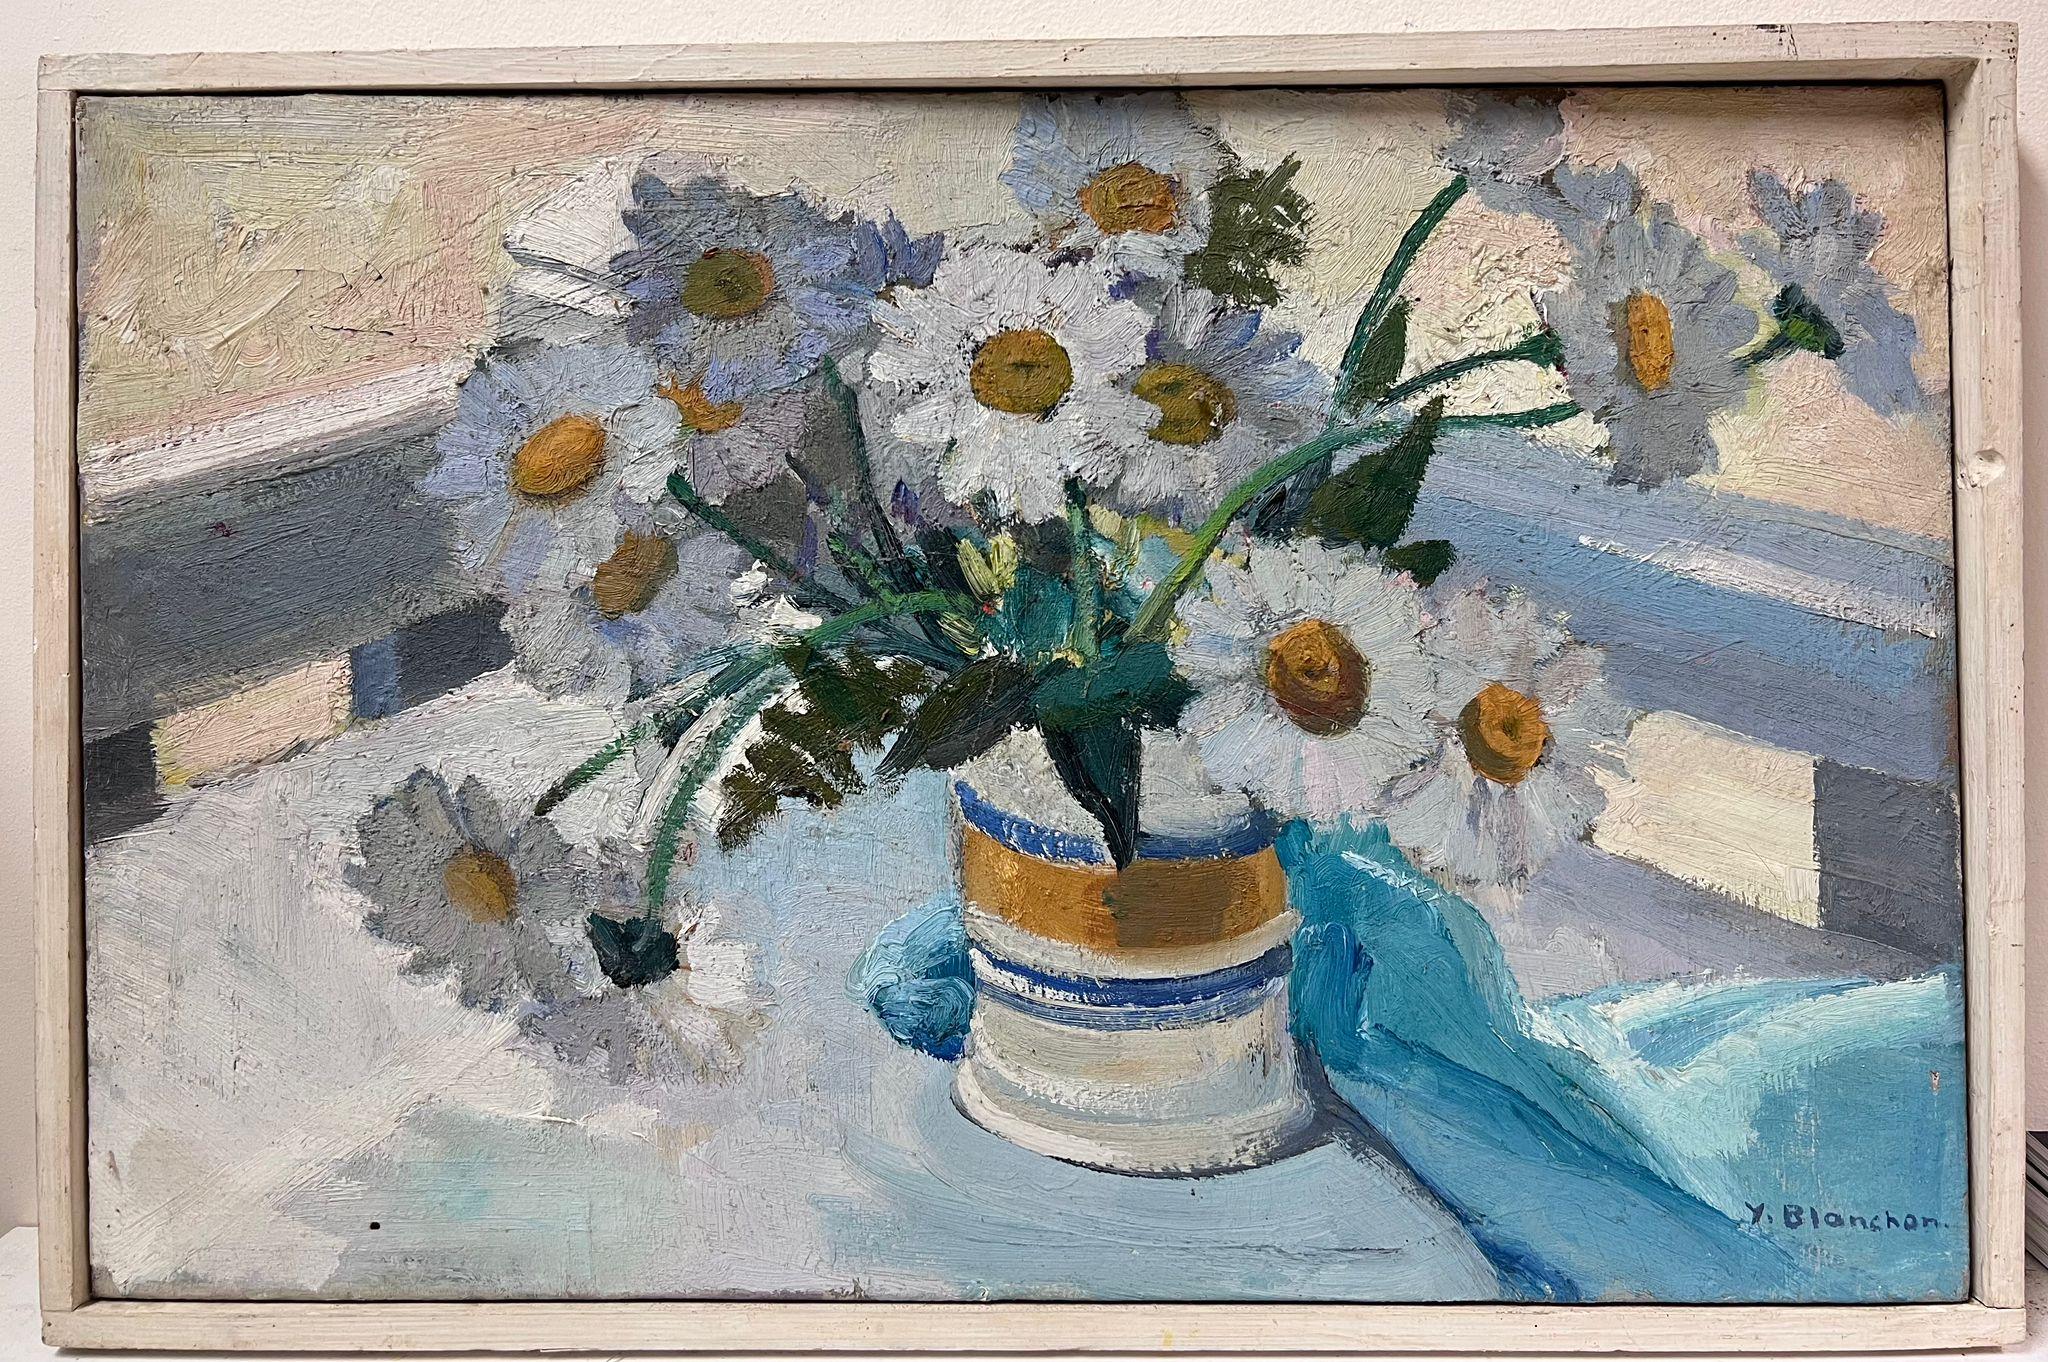 Y. Blanchon Still-Life Painting - 1930's French Impressionist Daises In Vase On Blue and White Table Interior